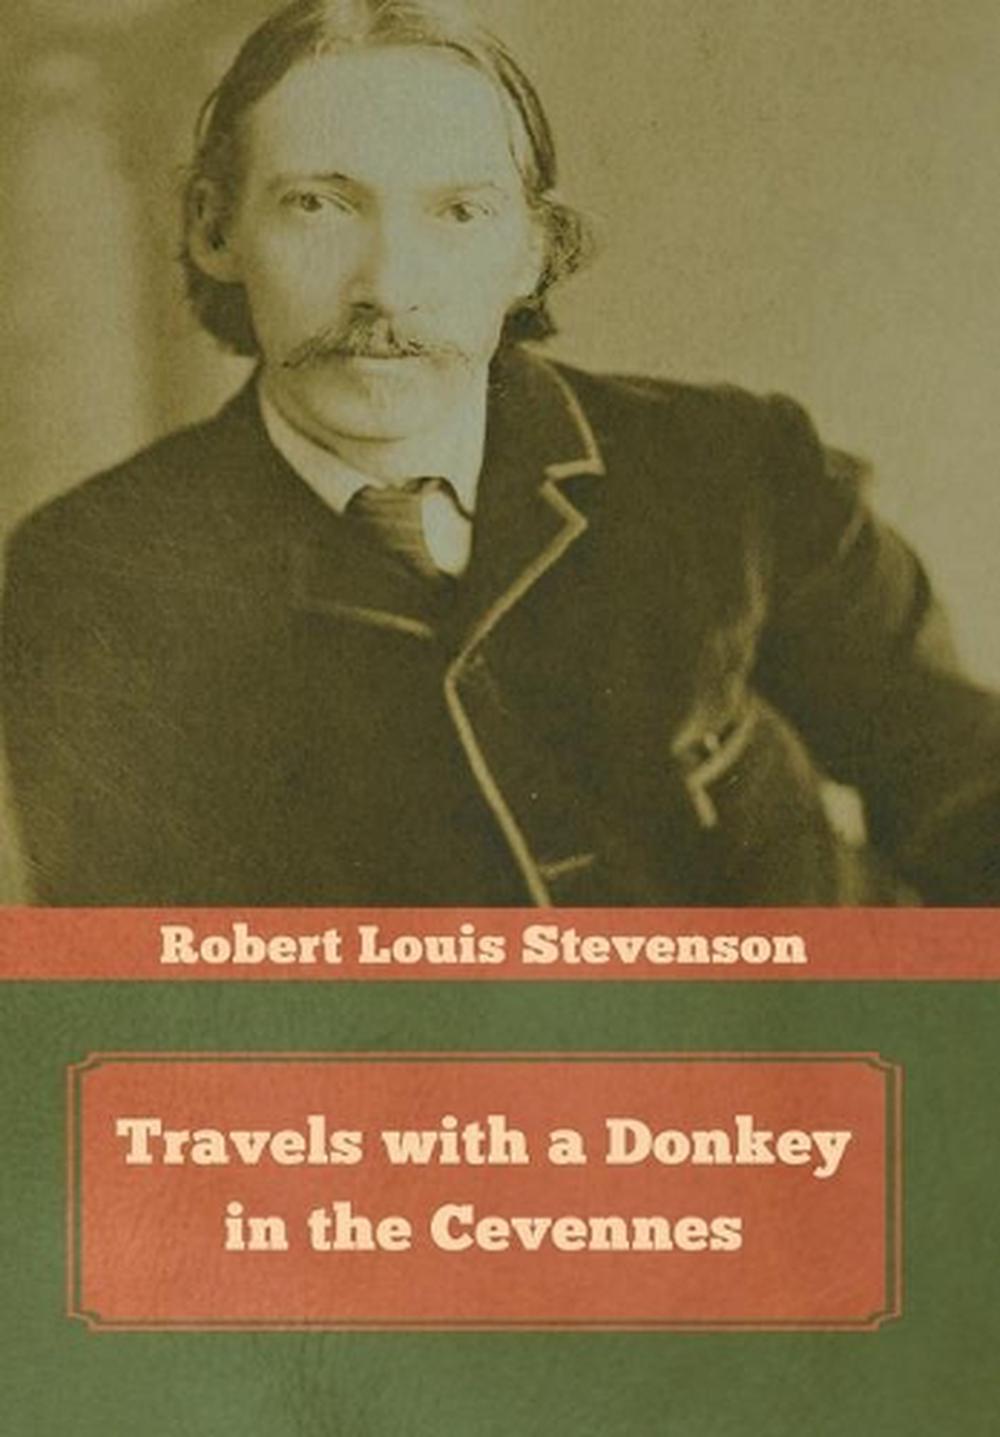 robert louis stevenson travels with a donkey